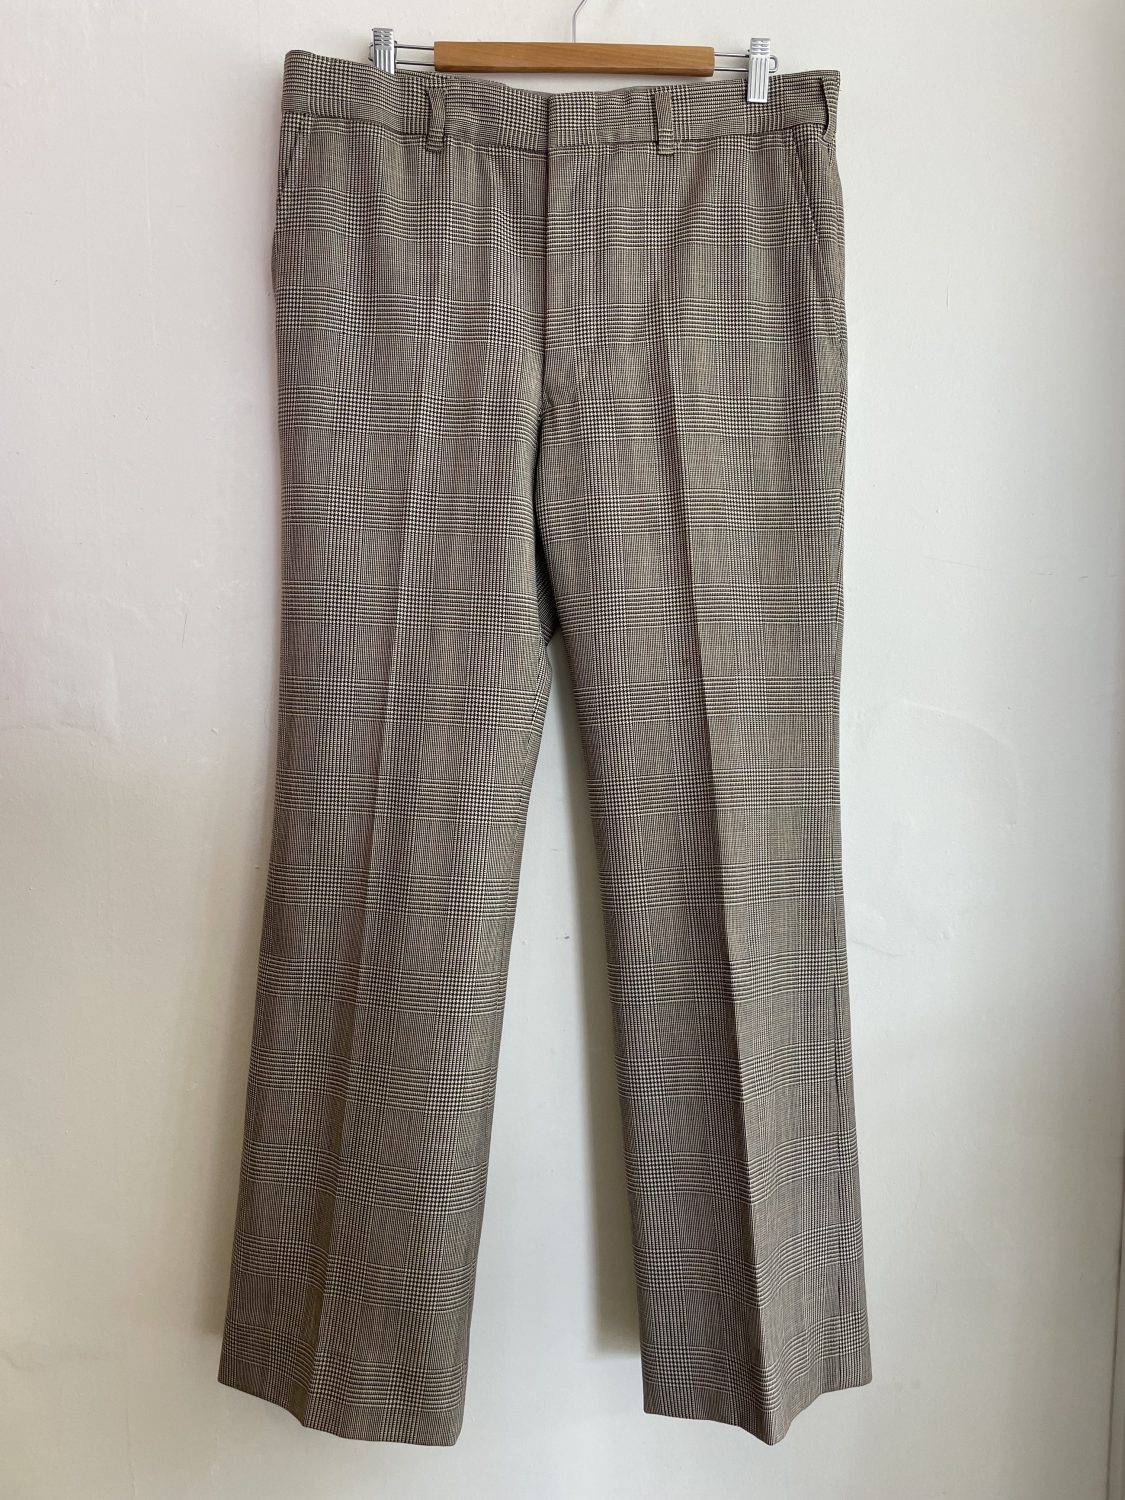 INTAGE 1970's MEN'S DETAILED BROWN CHECK FLARES | Chaos Bazaar Vintage